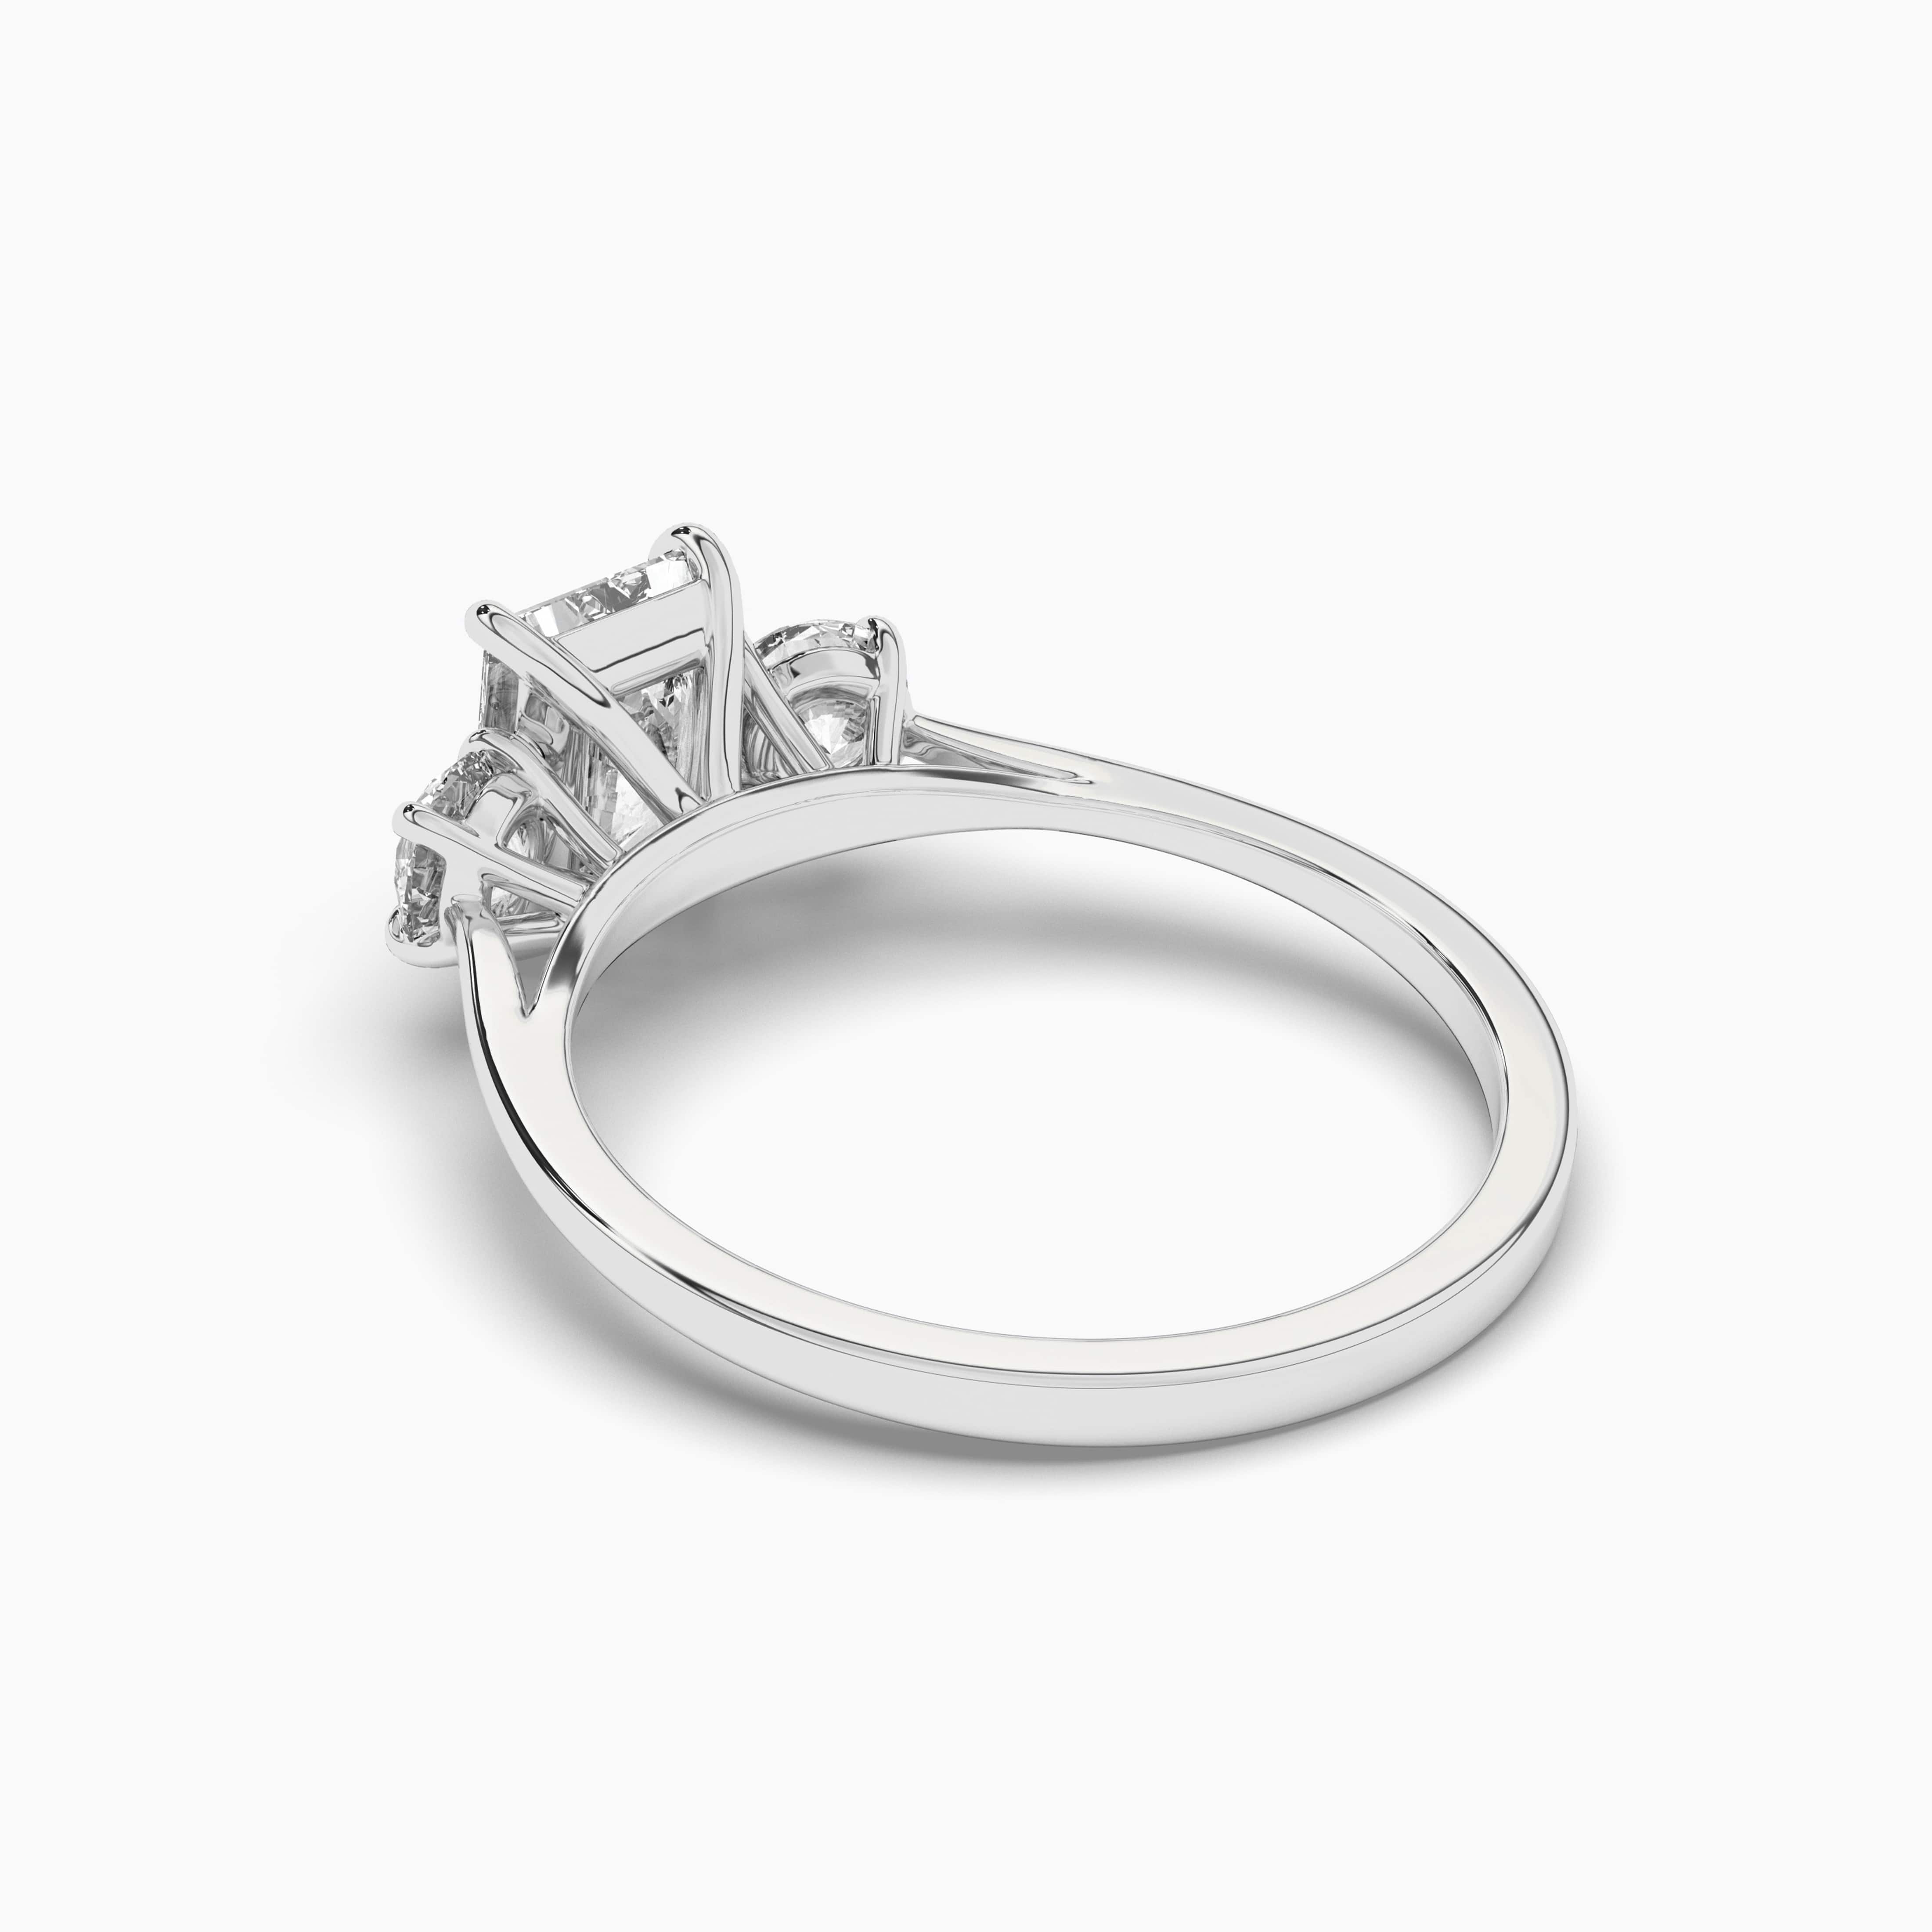 The Three Stone Radiant Engagement Ring White Gold